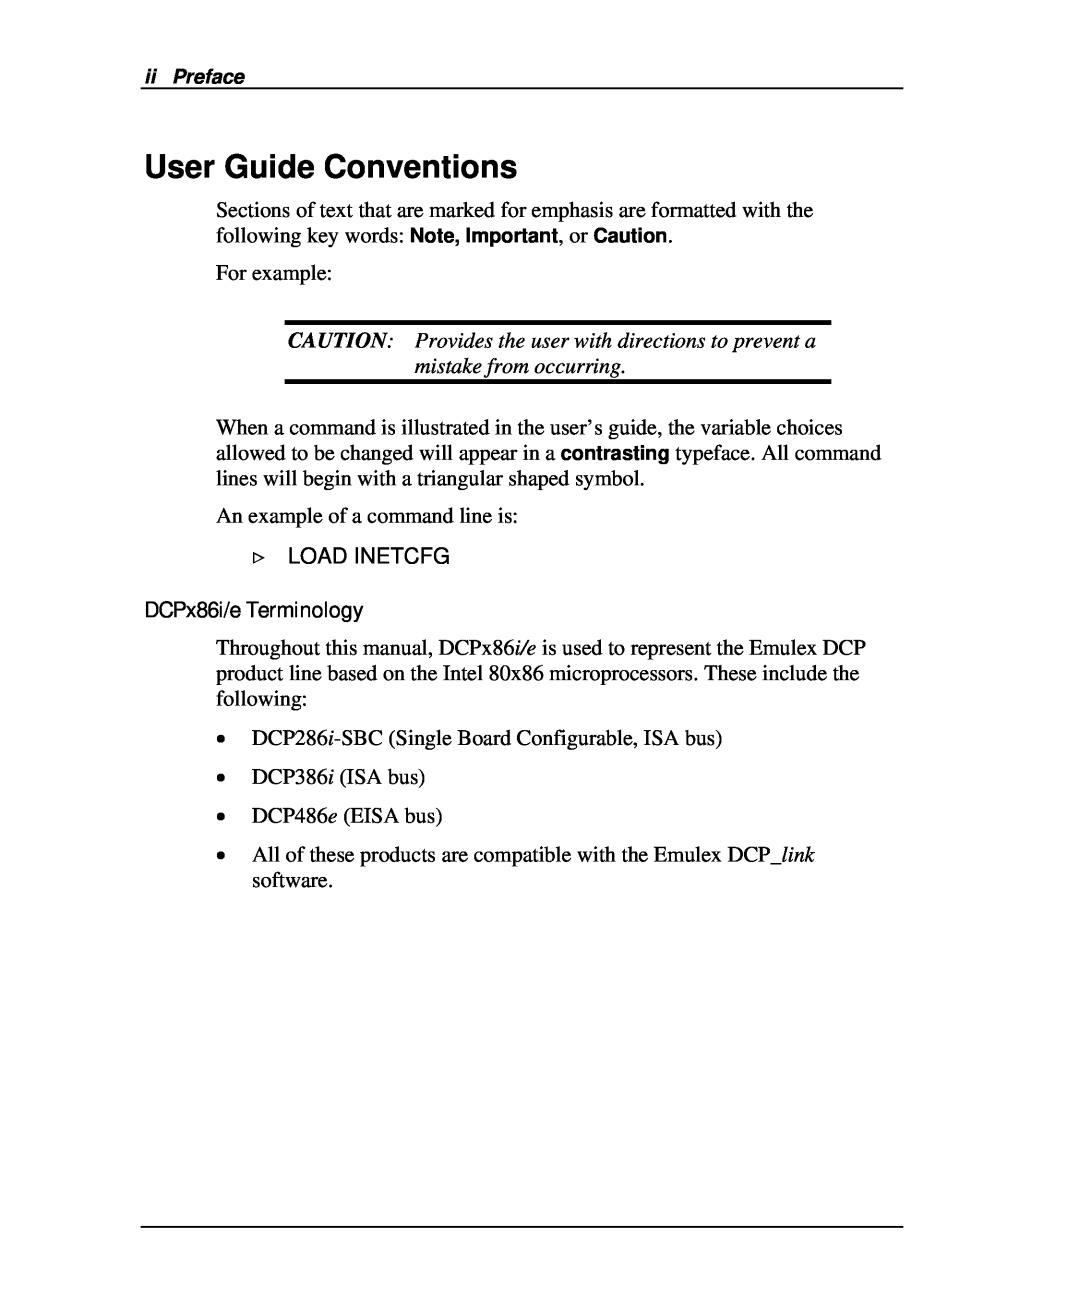 Emulex DCP_link manual User Guide Conventions, DCPx86i/e Terminology 